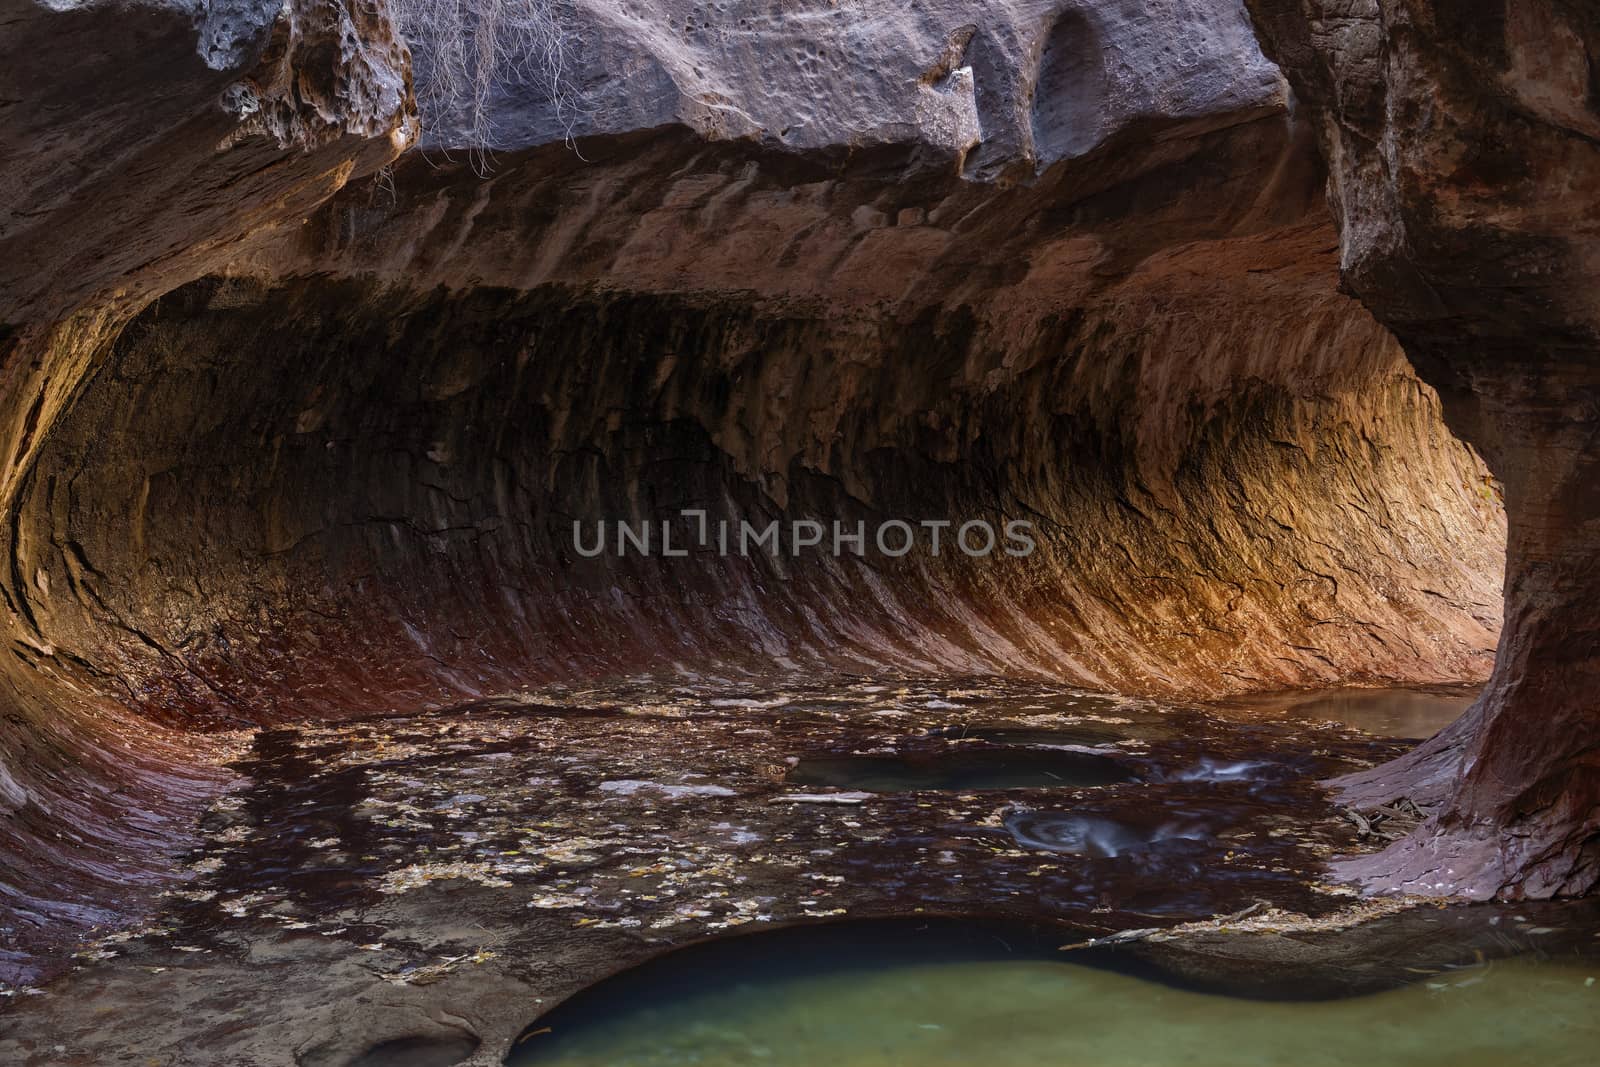 The Subway, Zion National Park by emiddelkoop